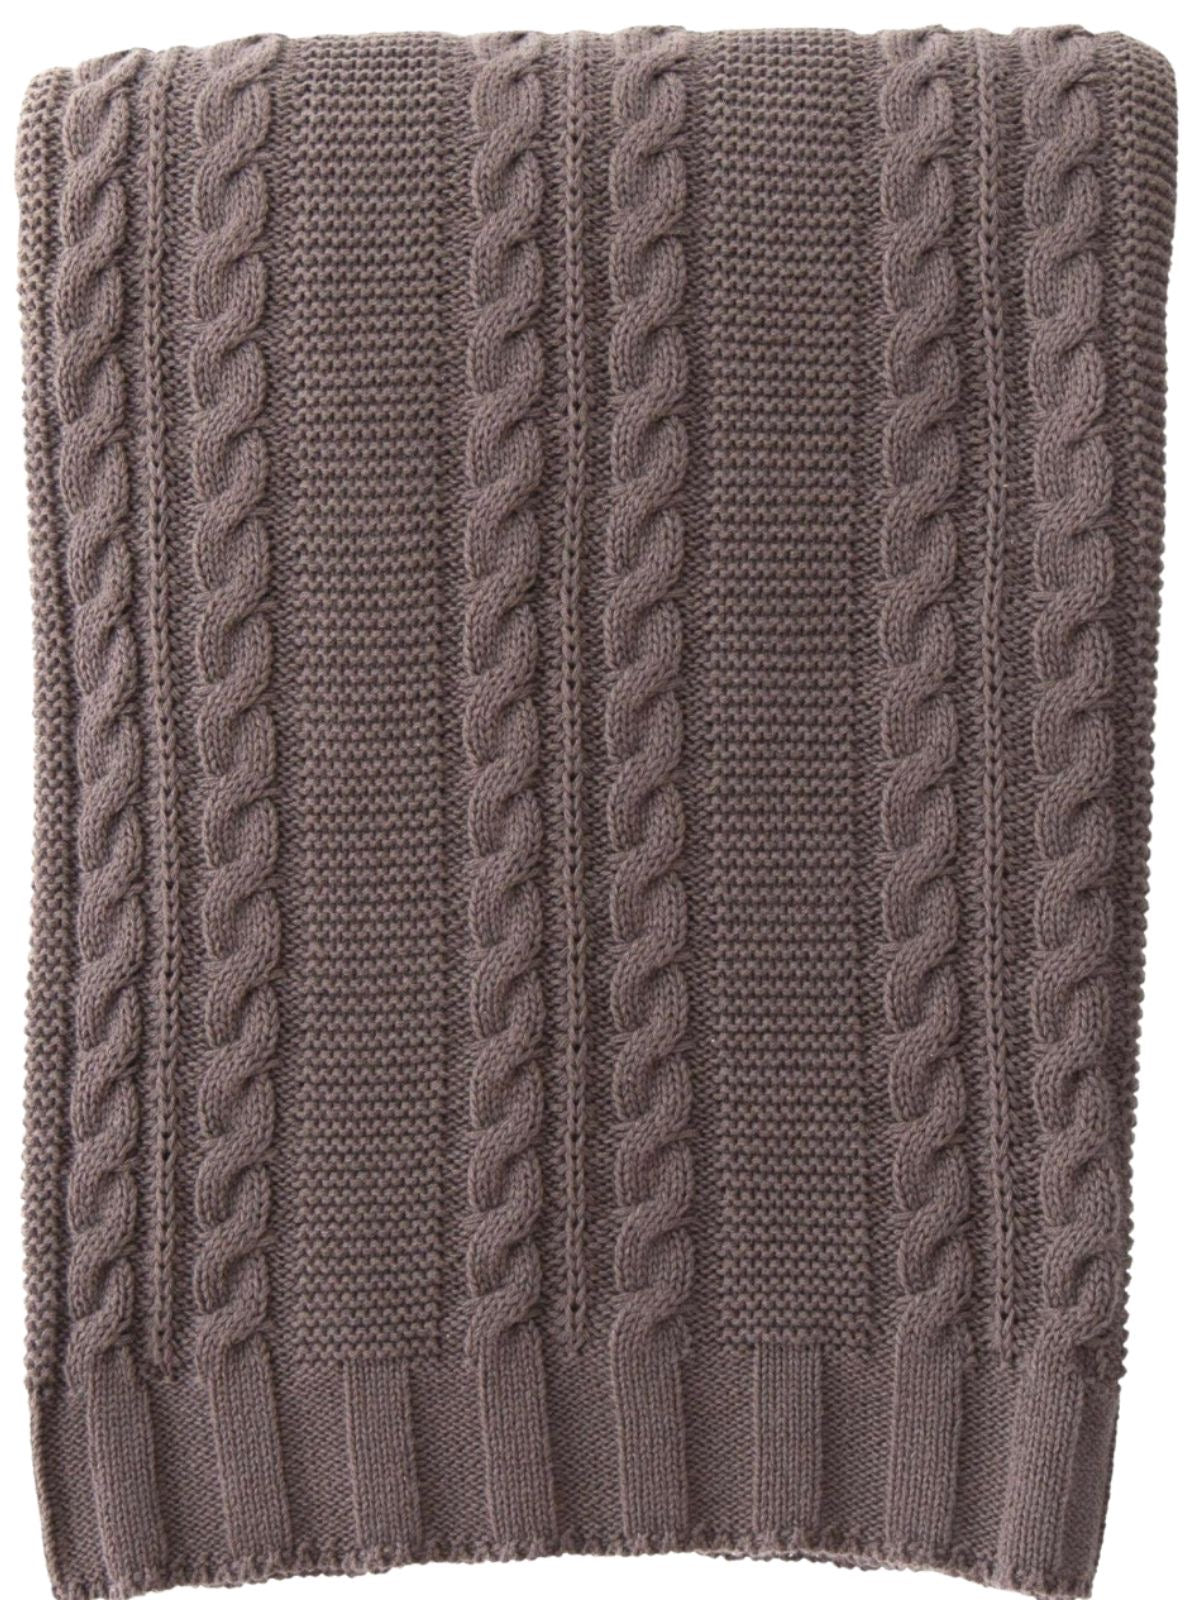 100% Cotton Cable Knit Decorative Throw Blanket in Charcoal, 50W x 60L. Sold by KYA Home Decor.